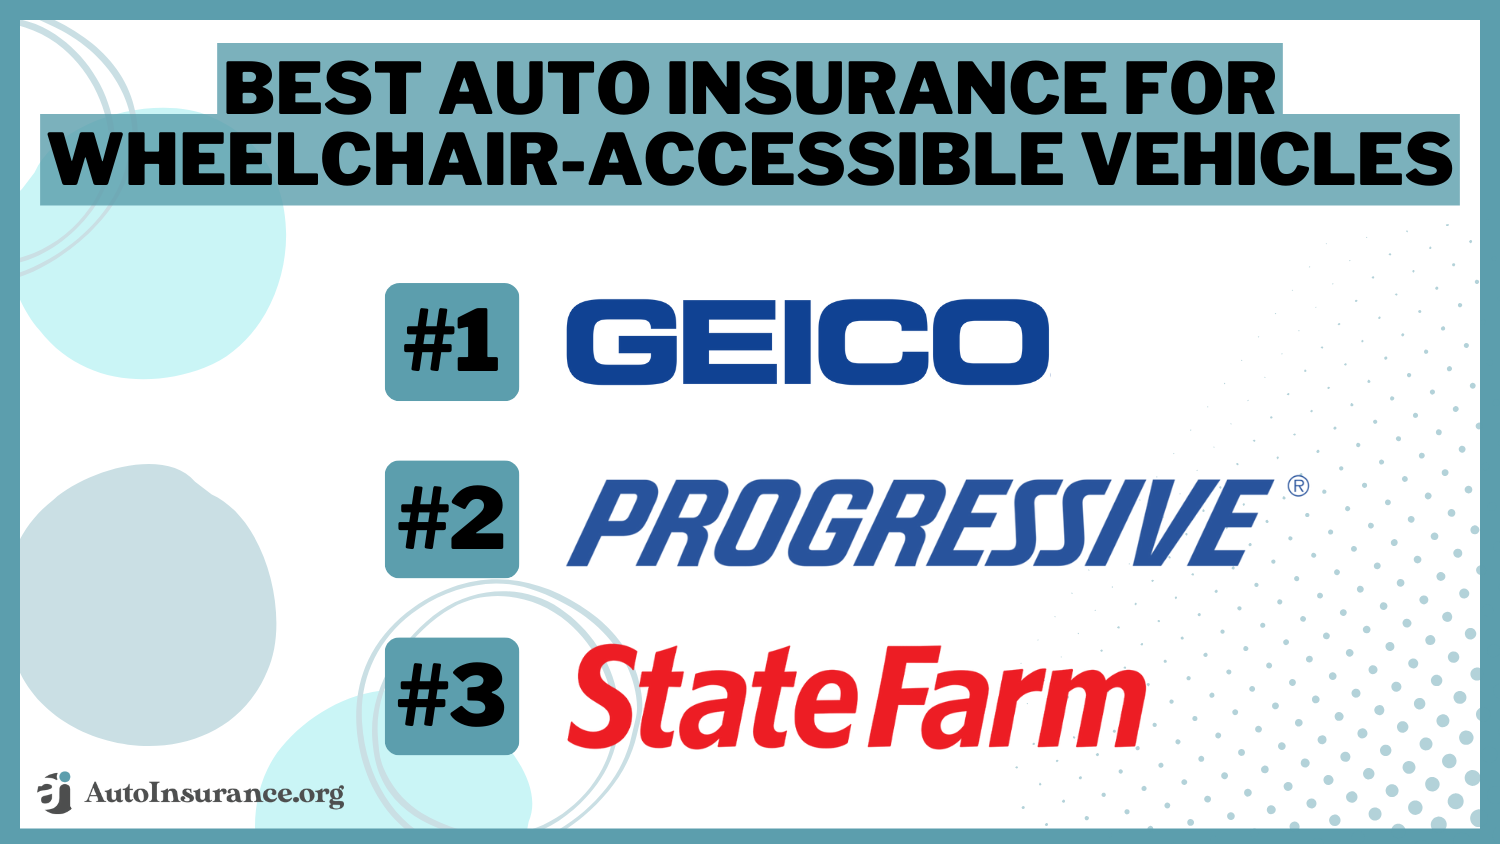 Best Auto Insurance for Wheelchair-Accessible Vehicles - Geico, Progressive, and State Farm